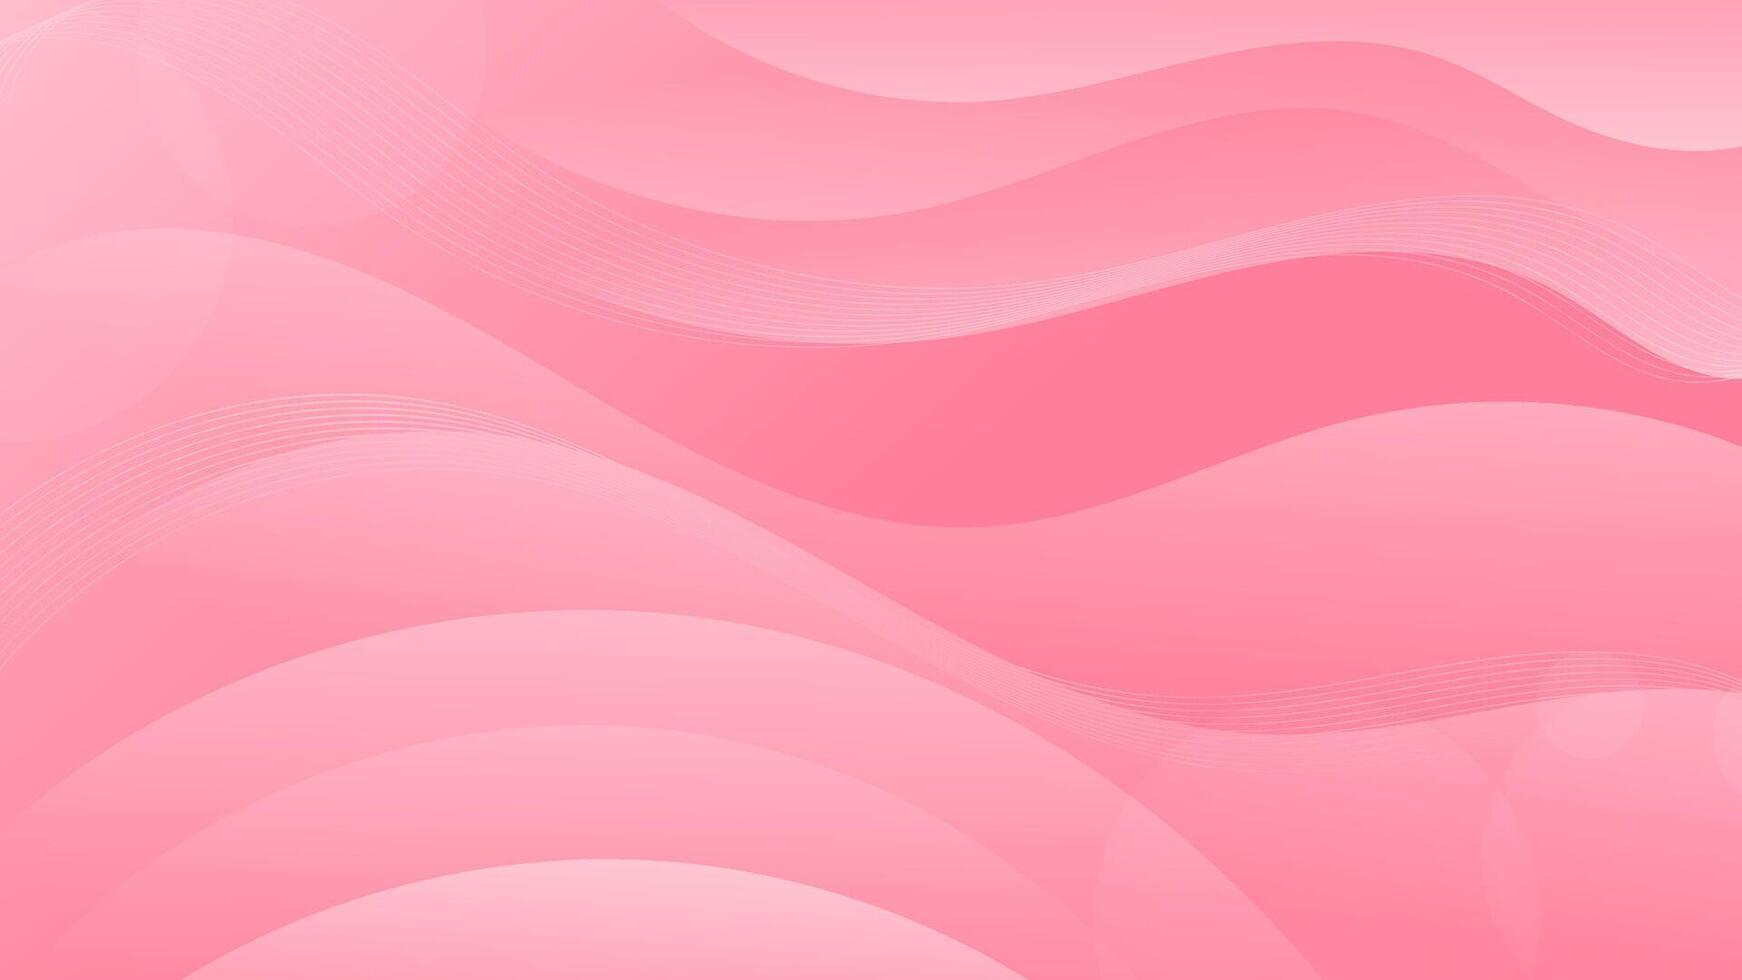 Abstract pink Background with Wavy Shapes. flowing and curvy shapes. This asset is suitable for website backgrounds, flyers, posters, and digital art projects. vector